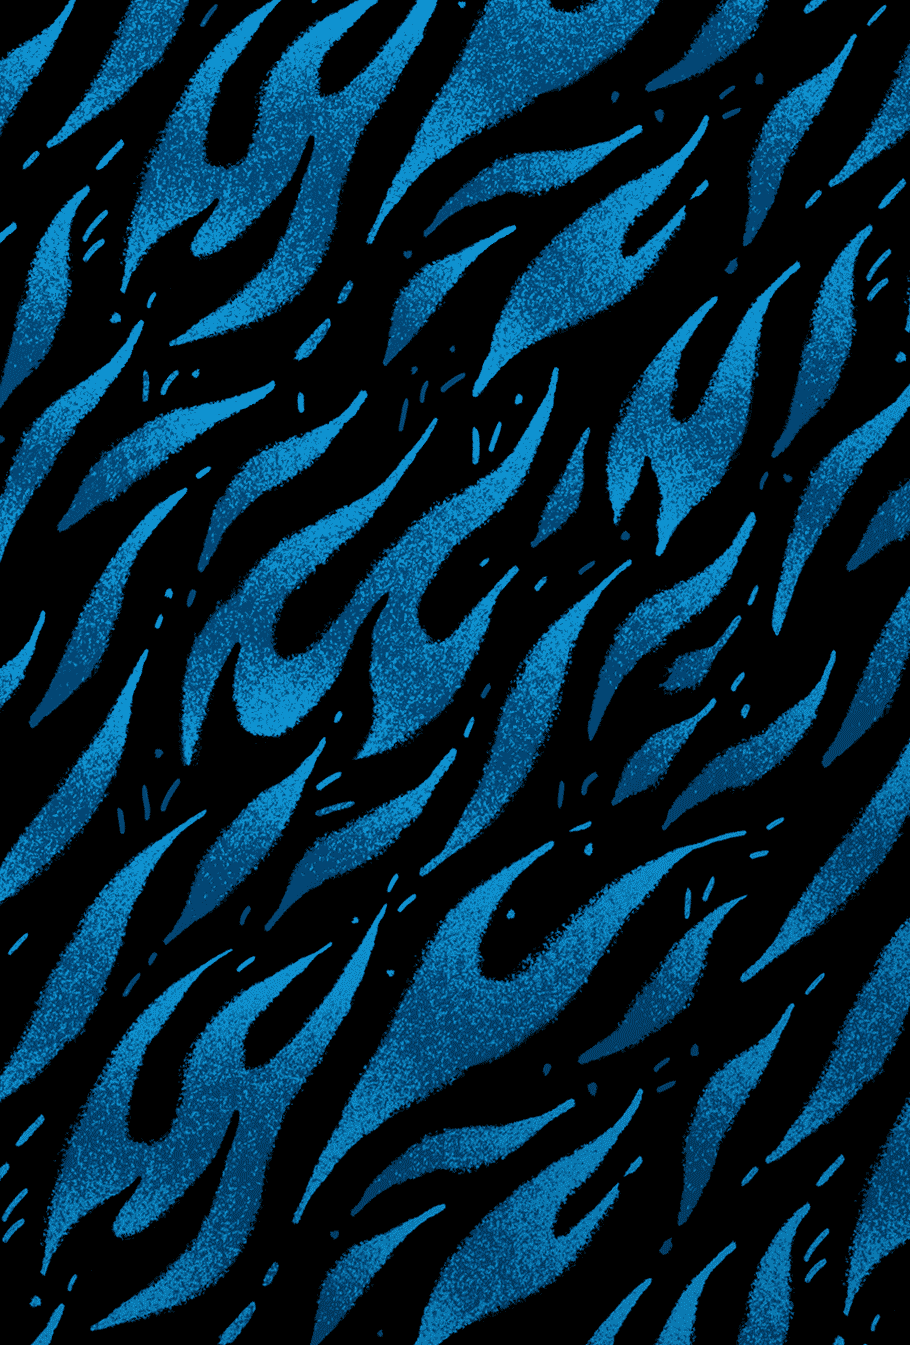 Detail of blue flames pattern illustration by Andrea Muller